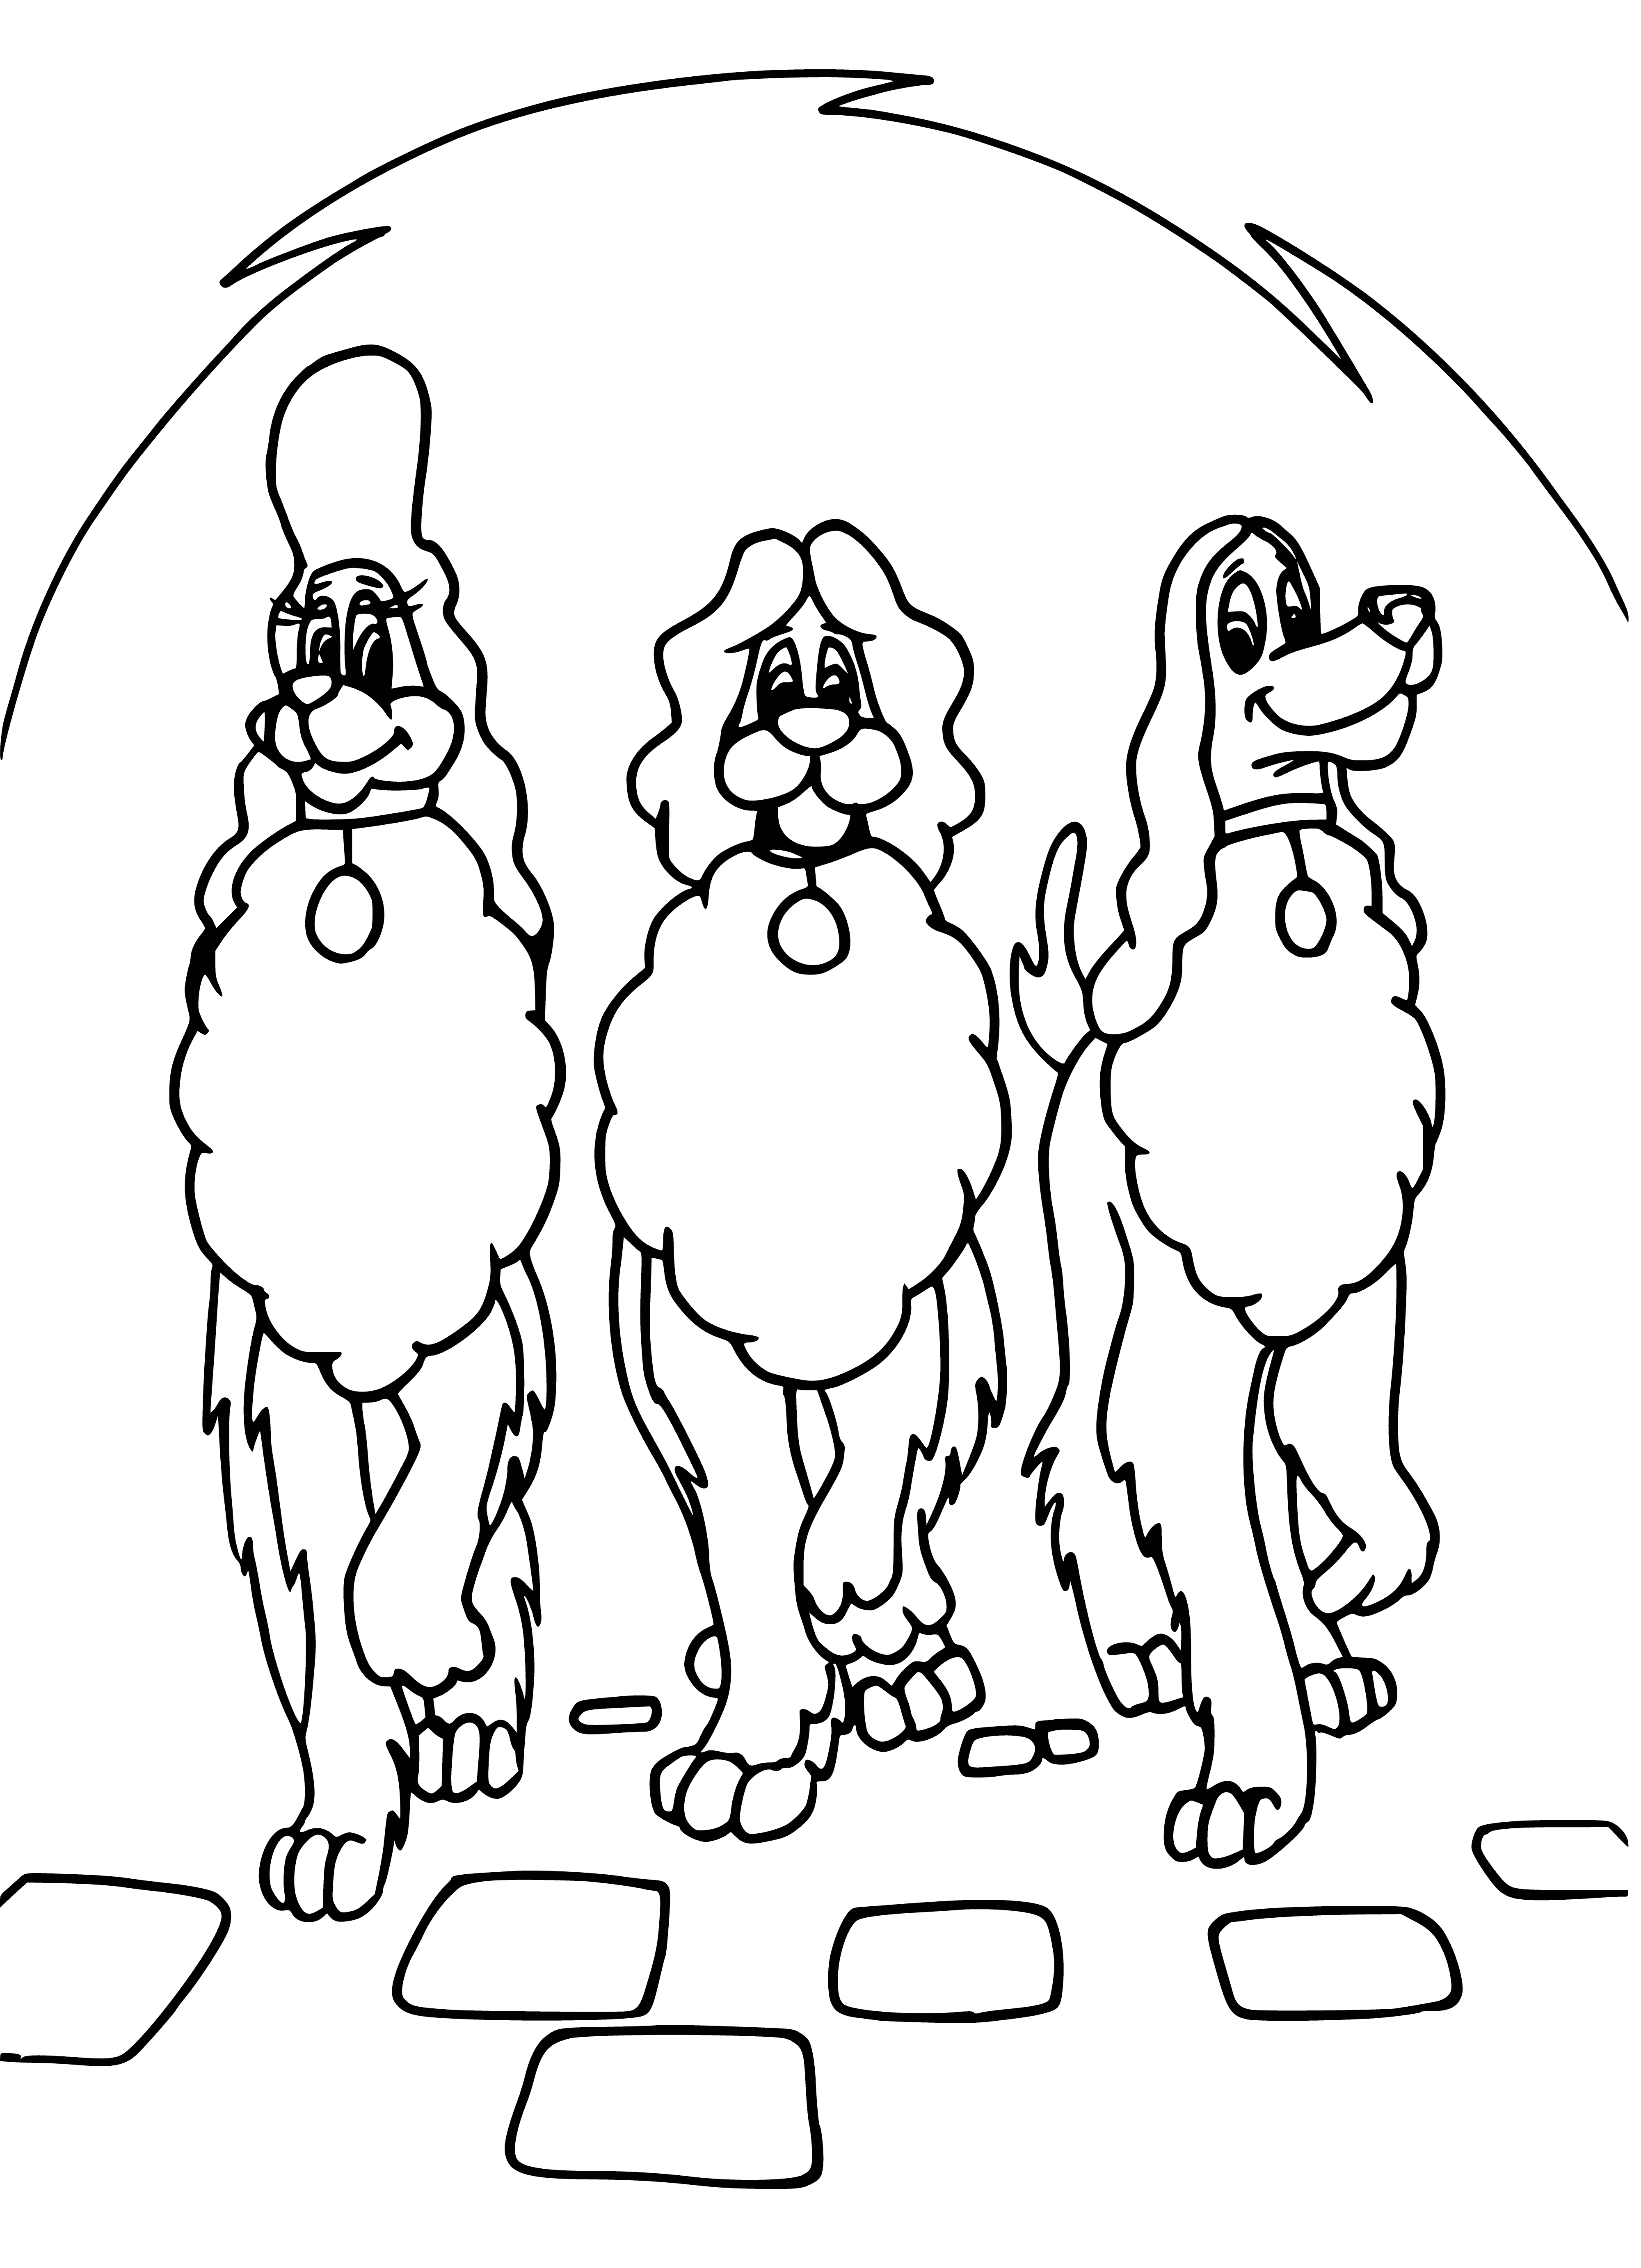 coloring page: Dog in blue shirt & brown boots stands on street corner w/brown baguette in mouth. Sign reads "Three Musketeers." #cuteanimals